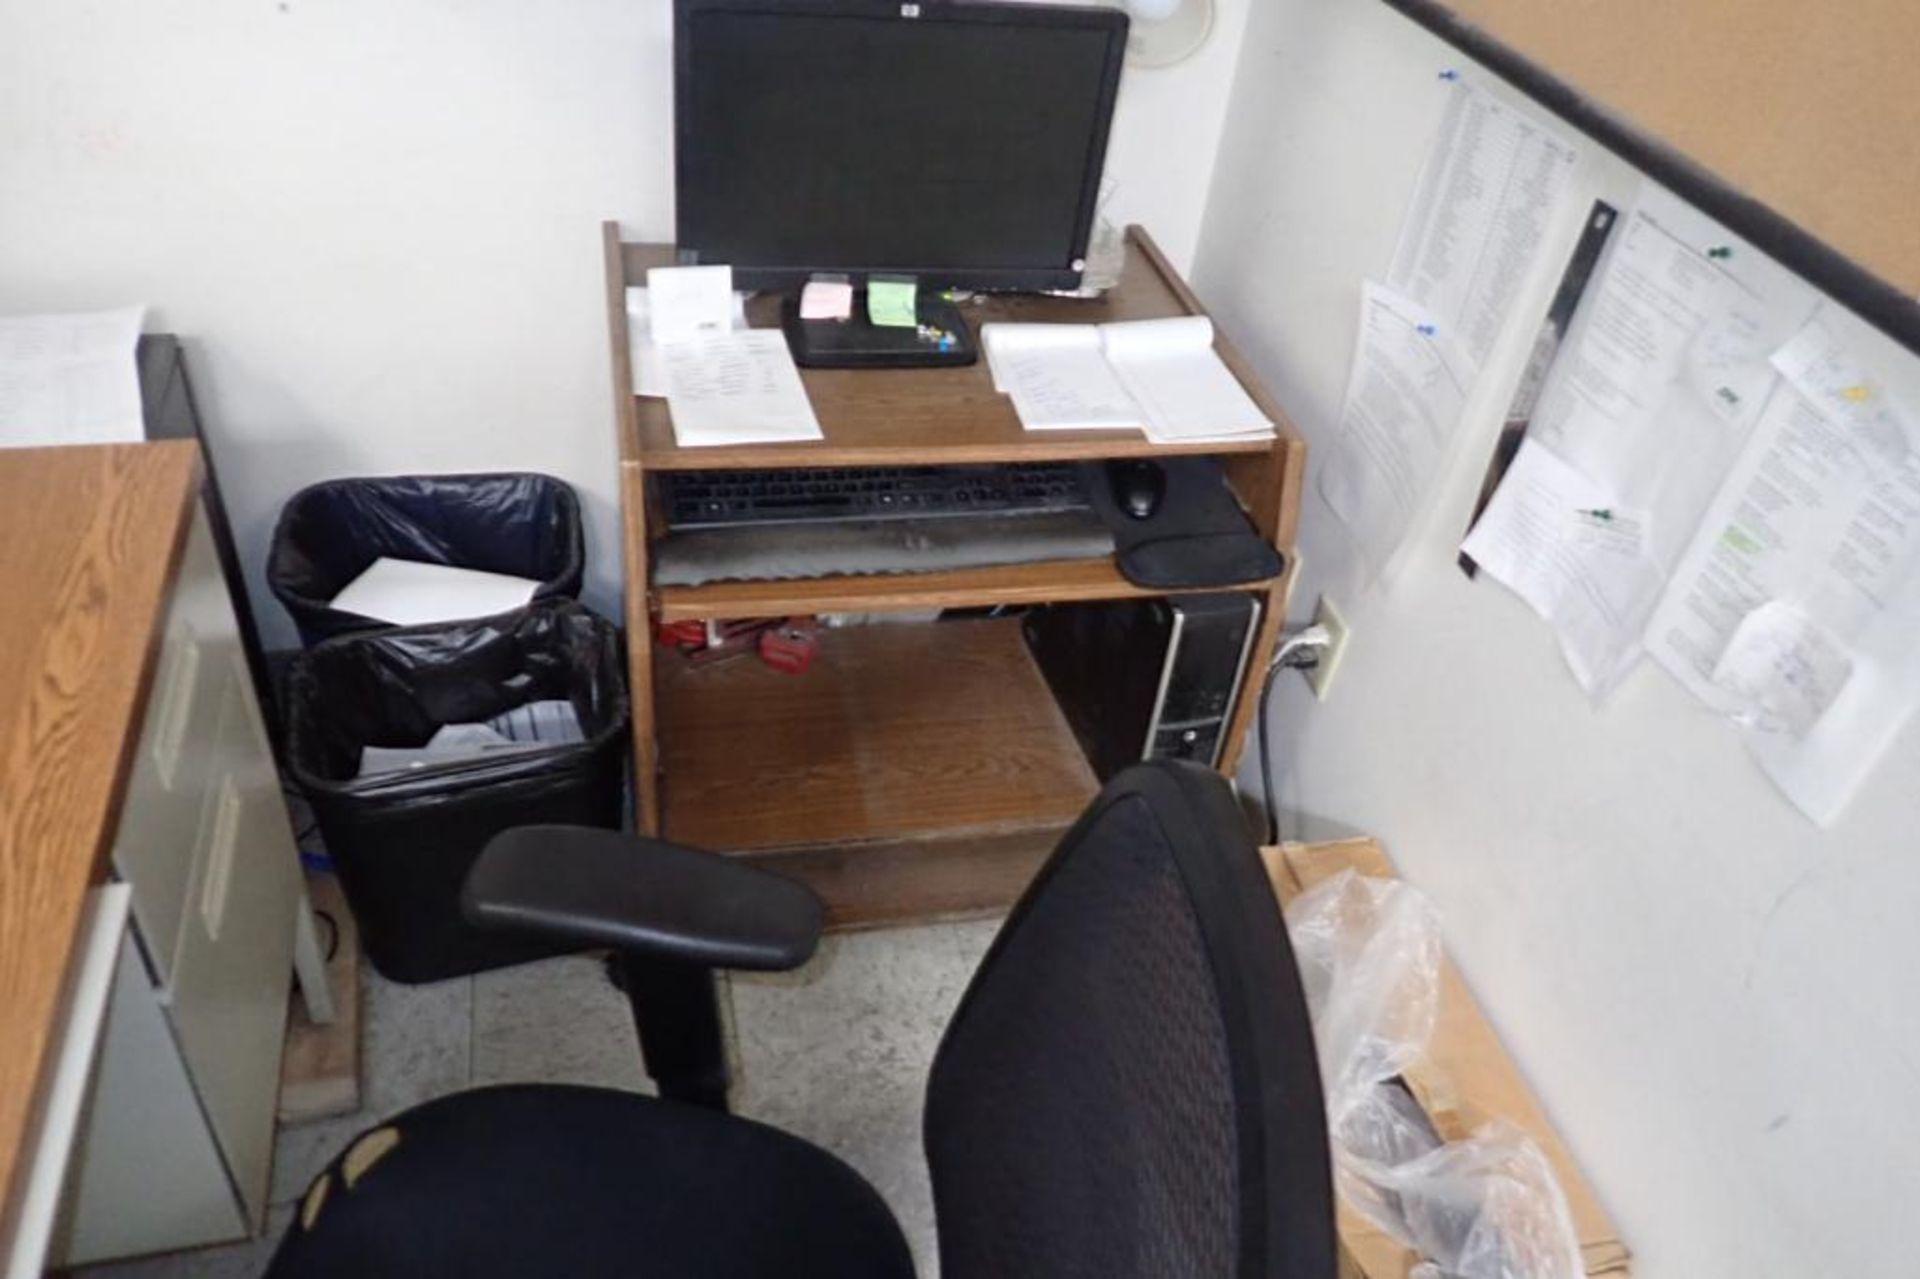 Contents of office, 2 desks, filing cabinets, white board, (not included; computer, printer phone). - Image 2 of 7